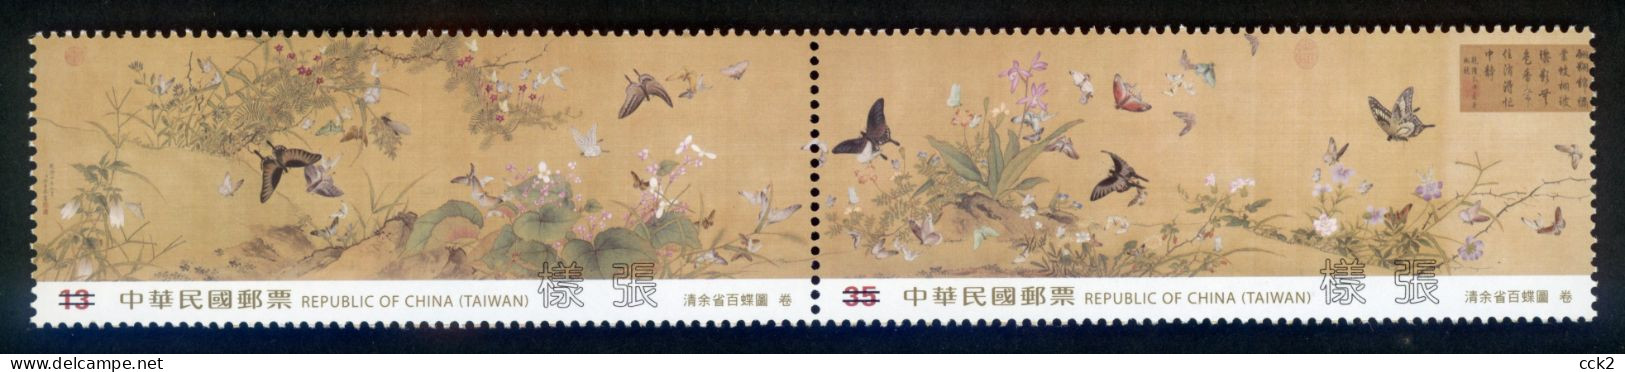 2023 Taiwan - R.O.CHINA -Myriad Butterflies Stamp / Specimen - Unused Stamps